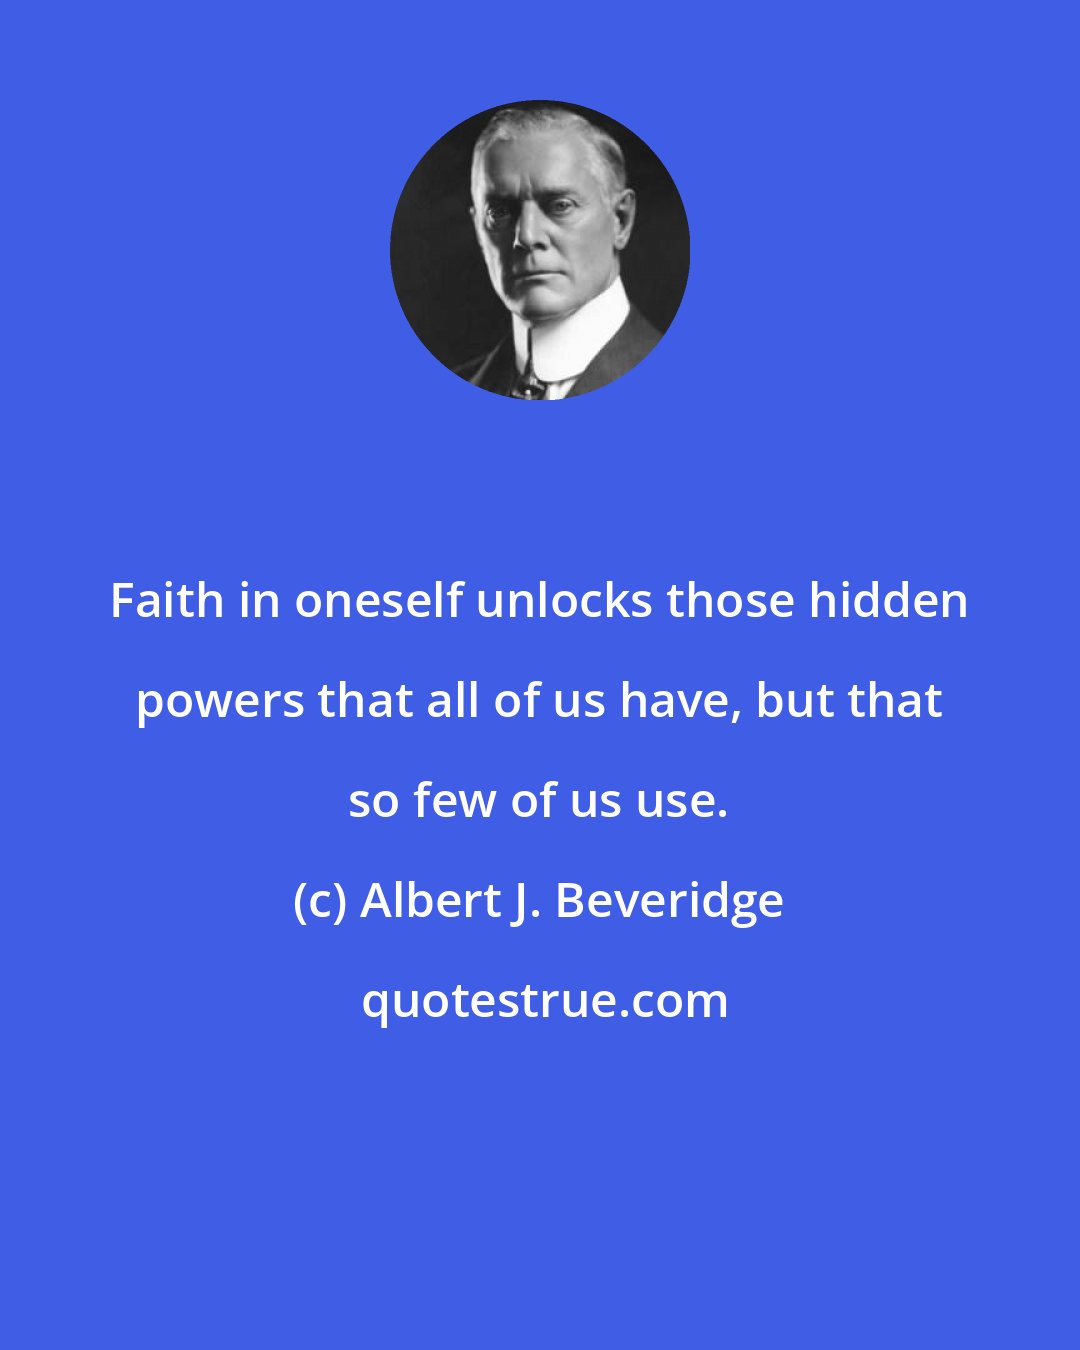 Albert J. Beveridge: Faith in oneself unlocks those hidden powers that all of us have, but that so few of us use.